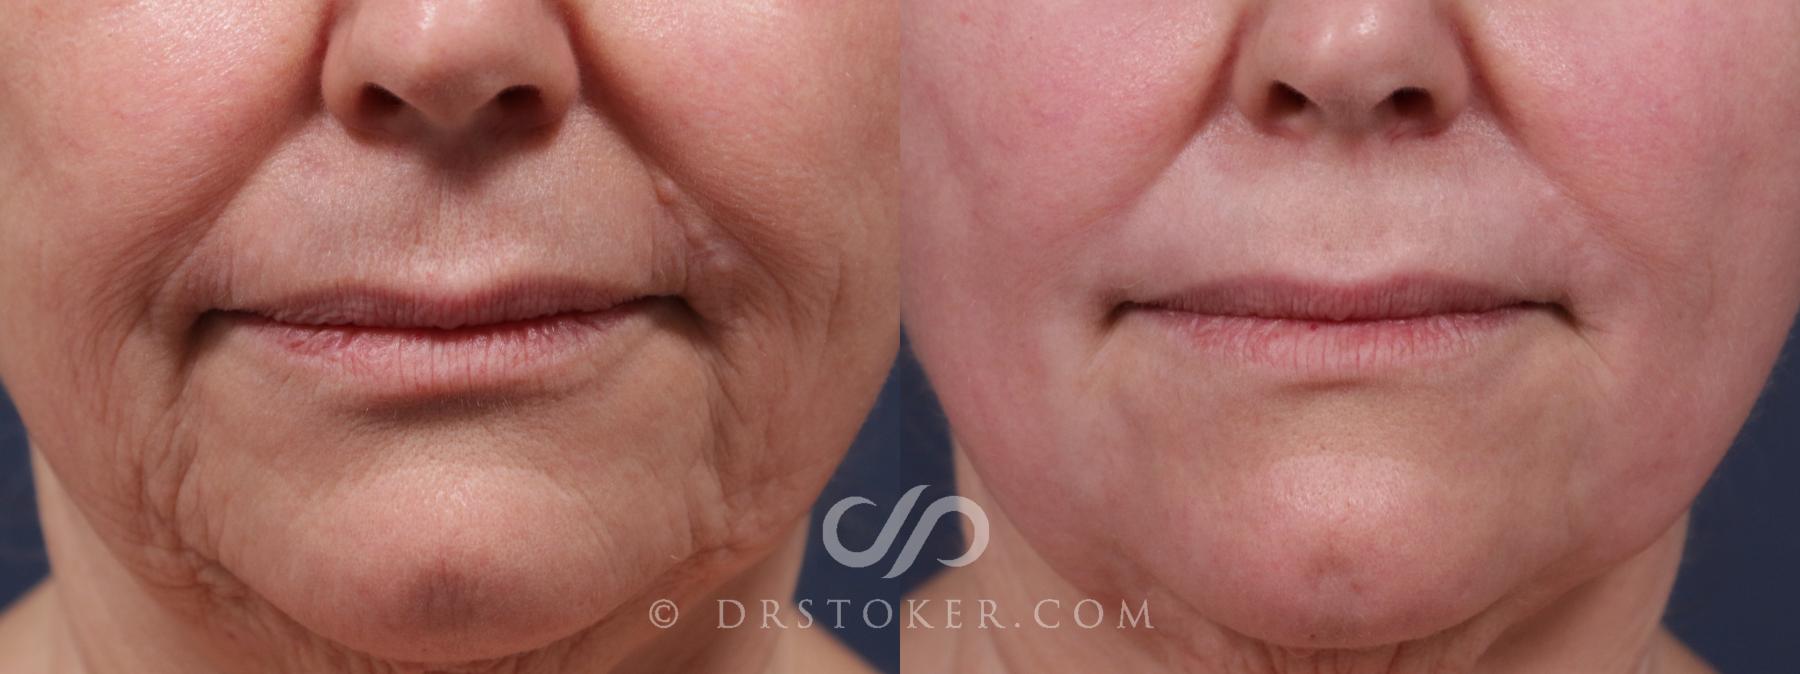 Before & After Laser Skin Resurfacing (Mouth) Case 2194 Front View in Los Angeles, CA